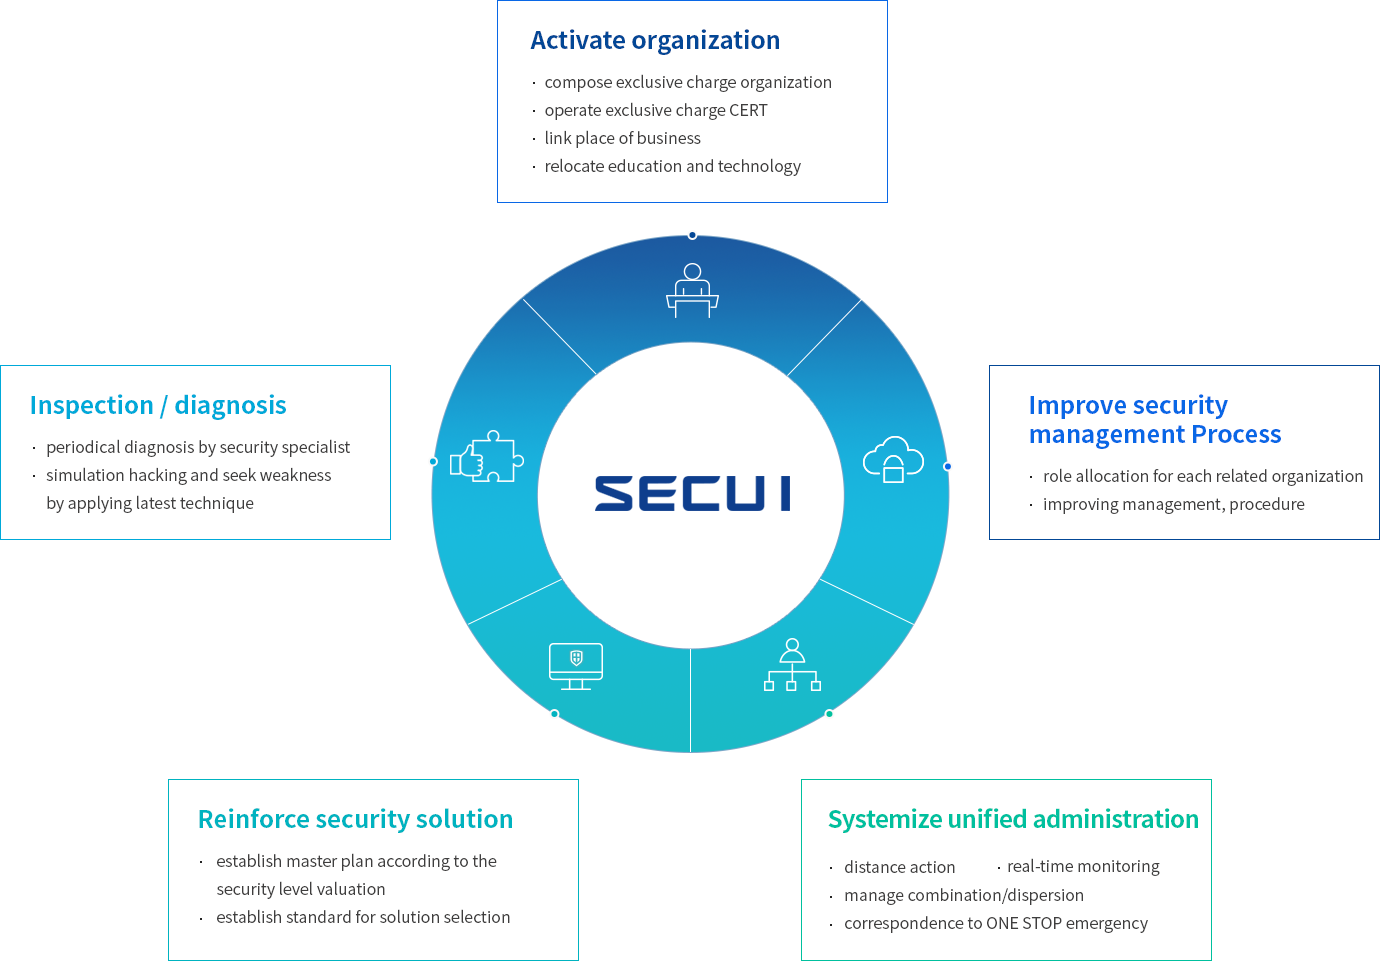 Activate organization, Improve security management Process, Inspection / diagnosis, Reinforce security solution, Systemize unified administration